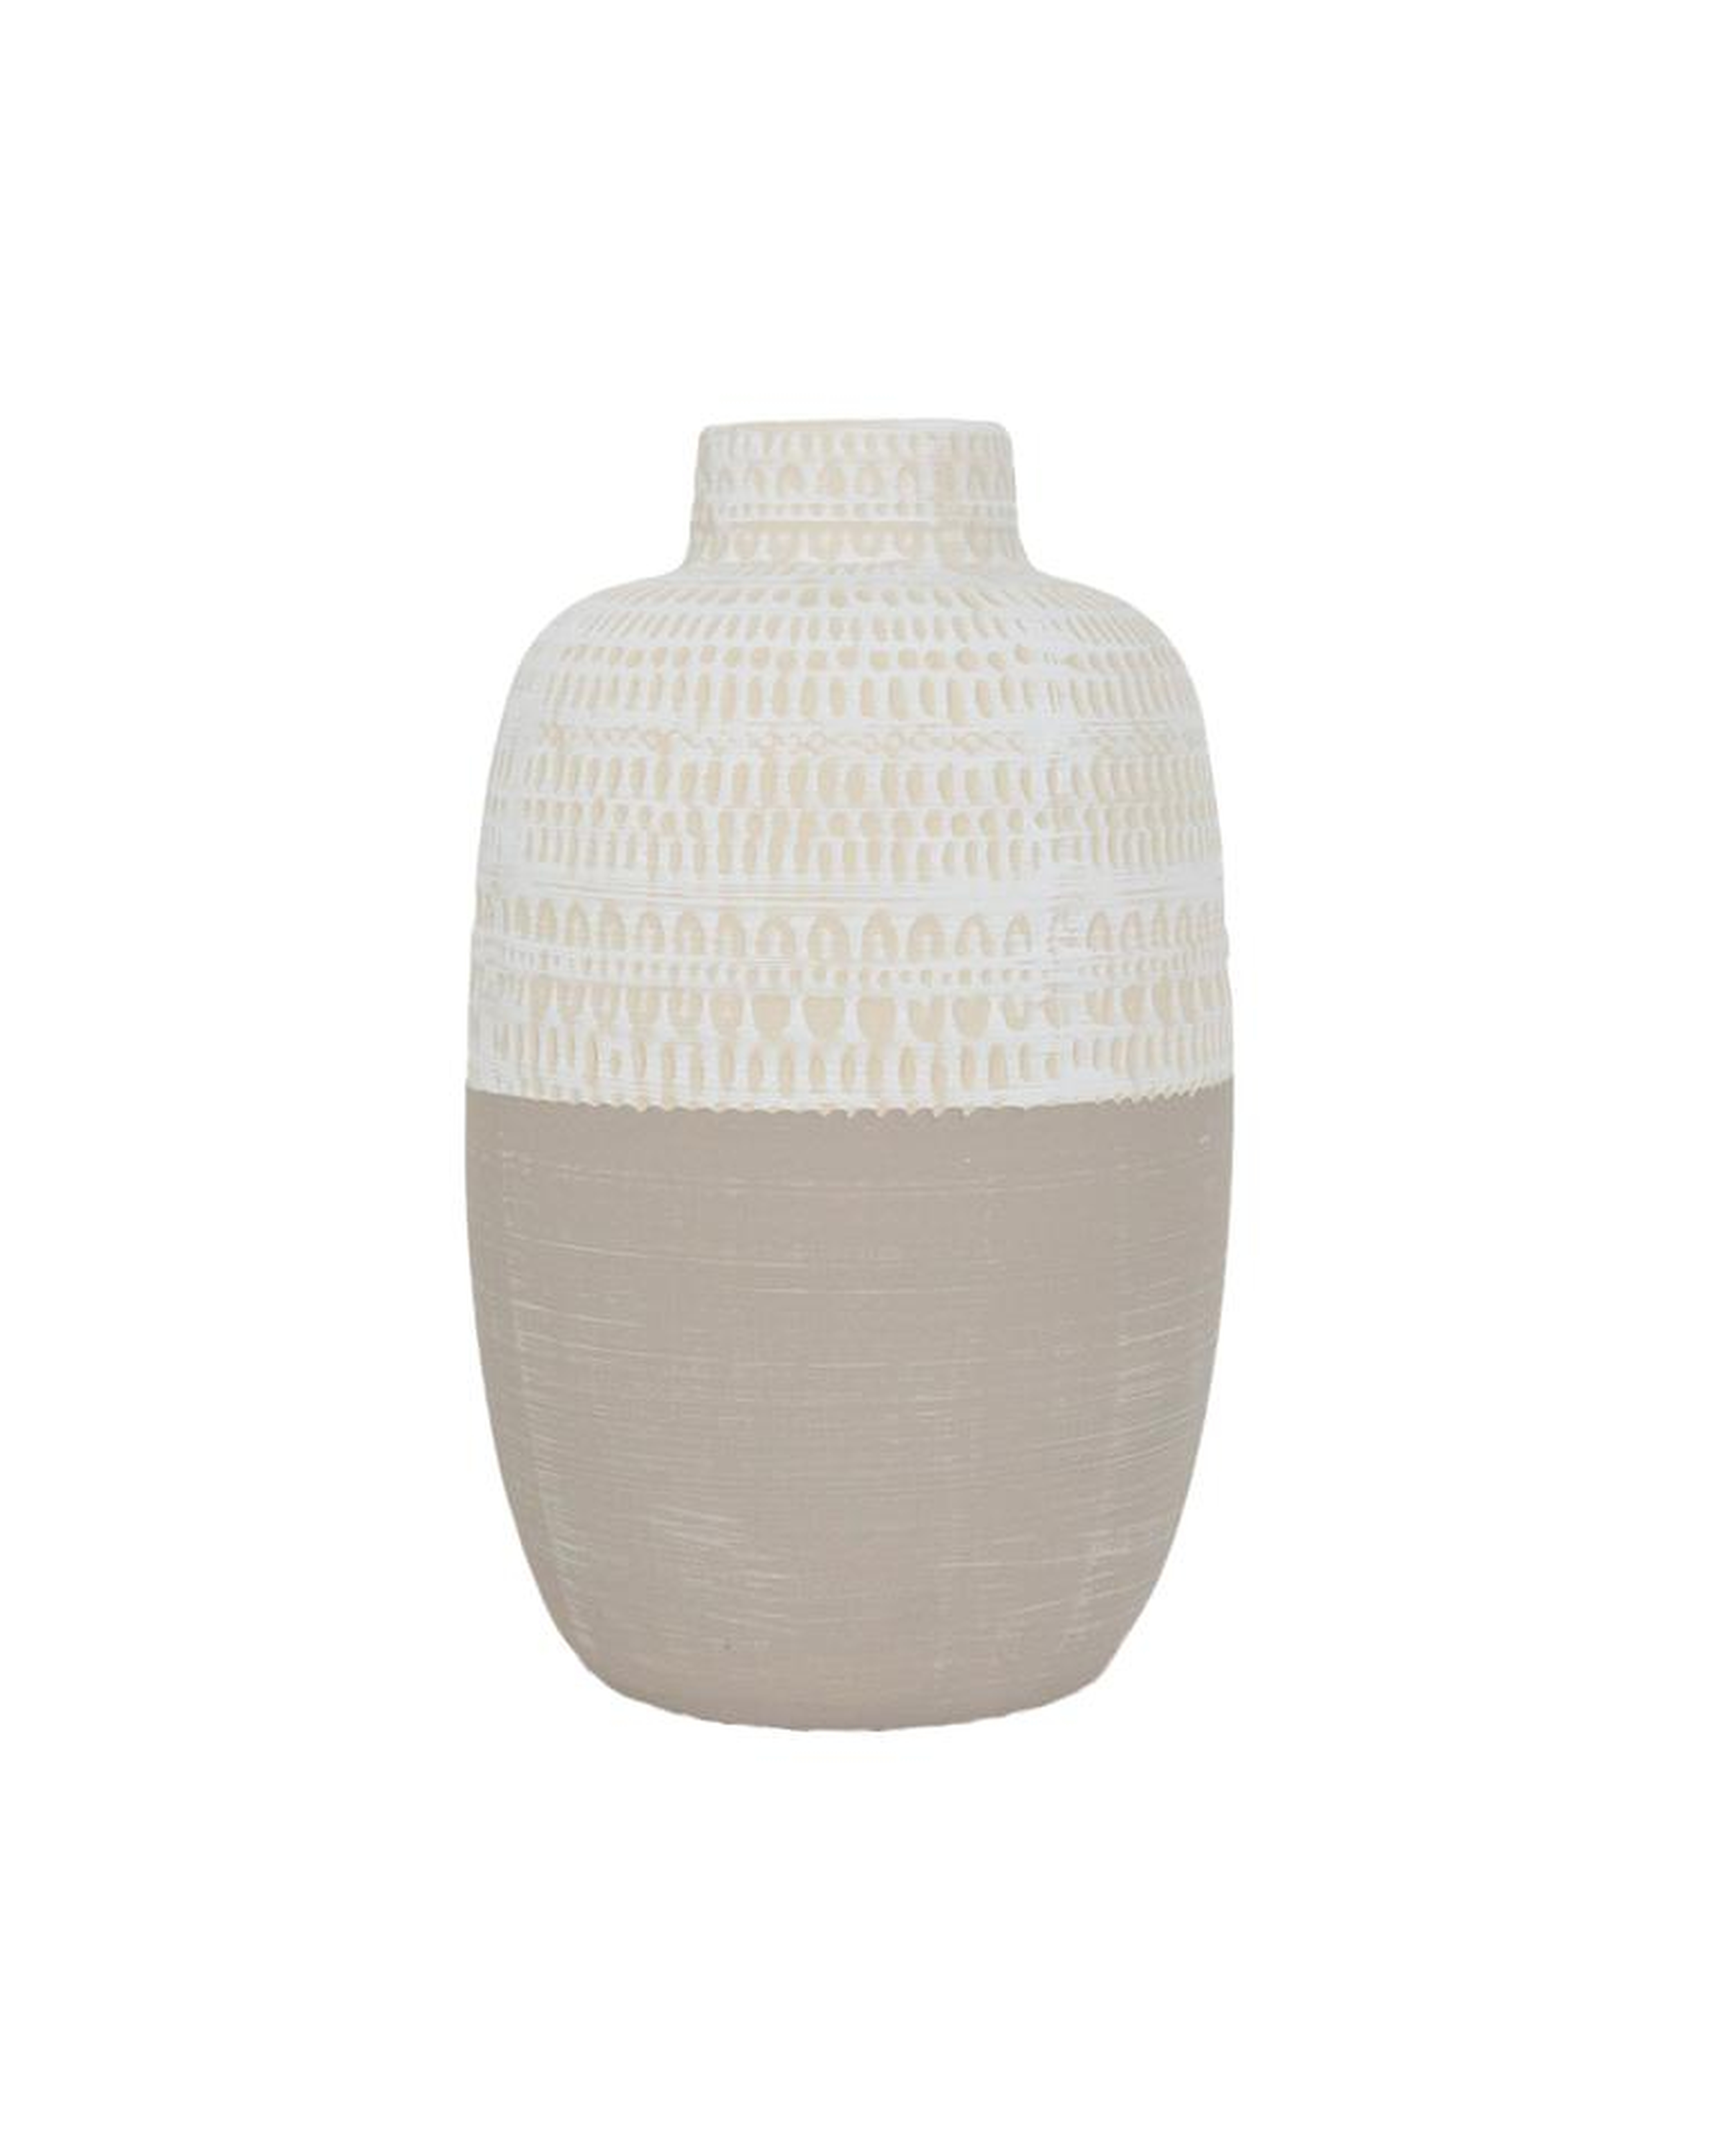 STAMPED TRIBAL VASE, SMALL - McGee & Co.